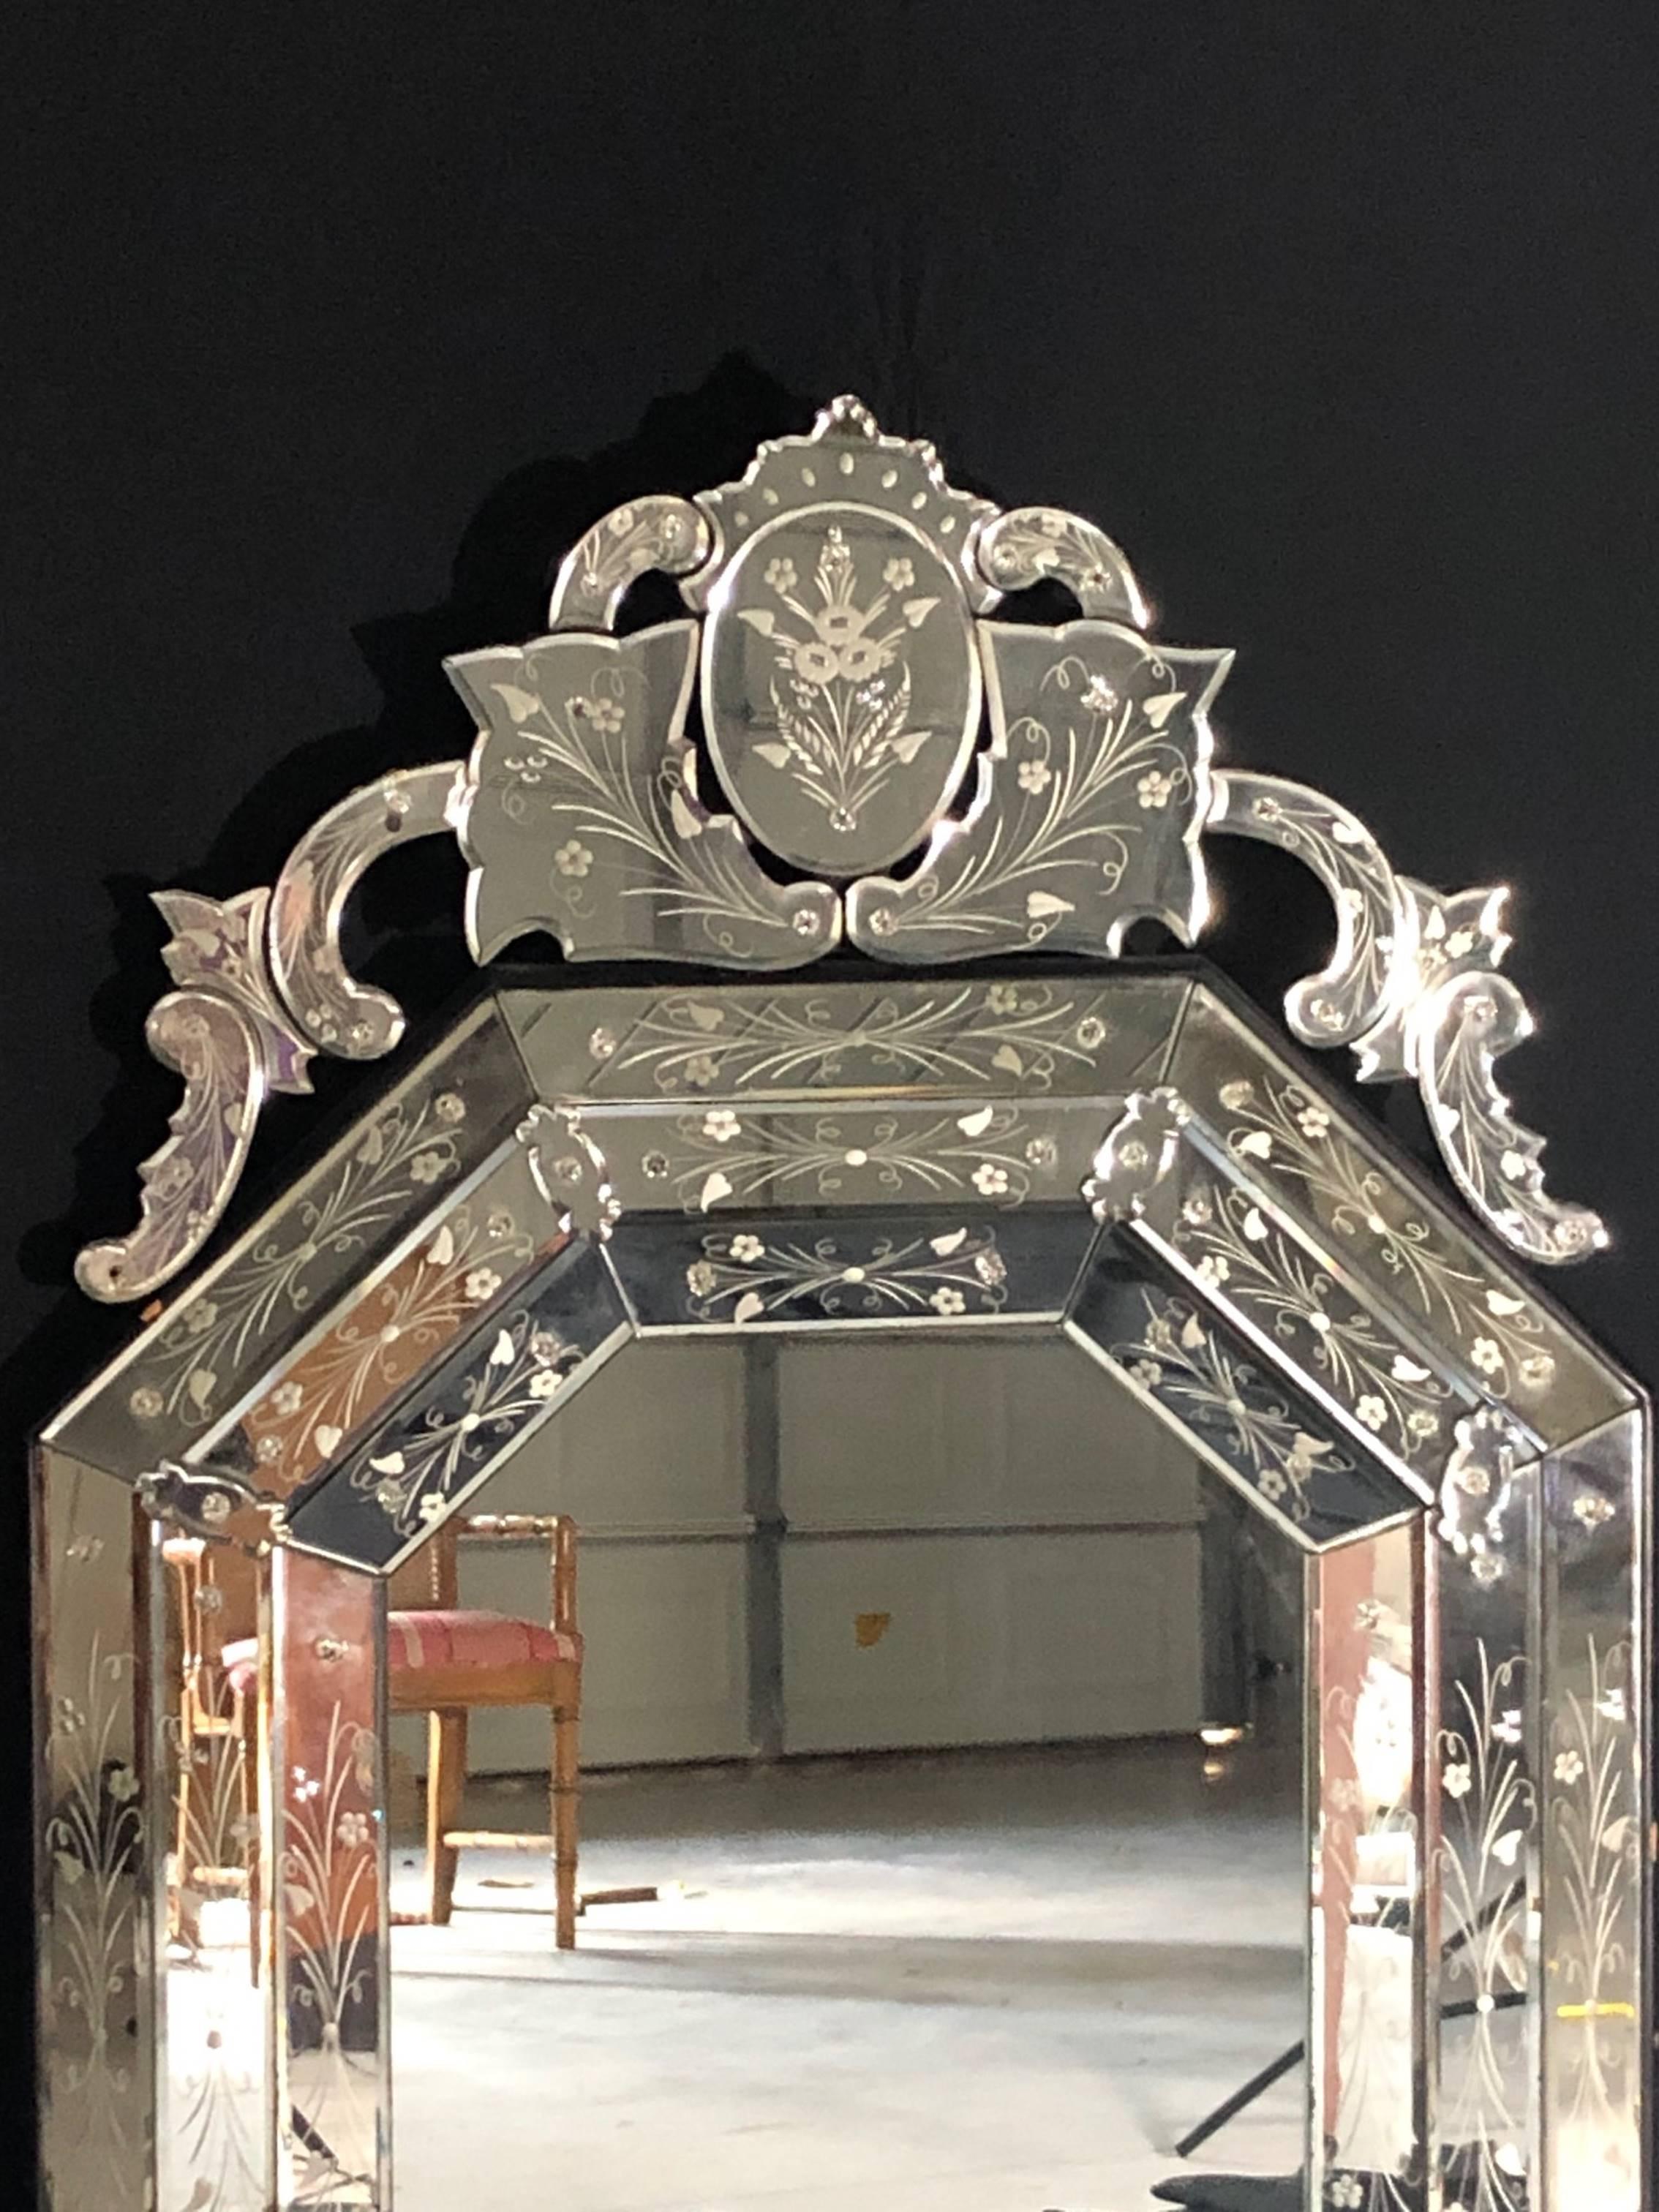 Lovely Venetian style mirror having octagonal shape with carved floral portrait in top oval. Significant size and detail! #5066.